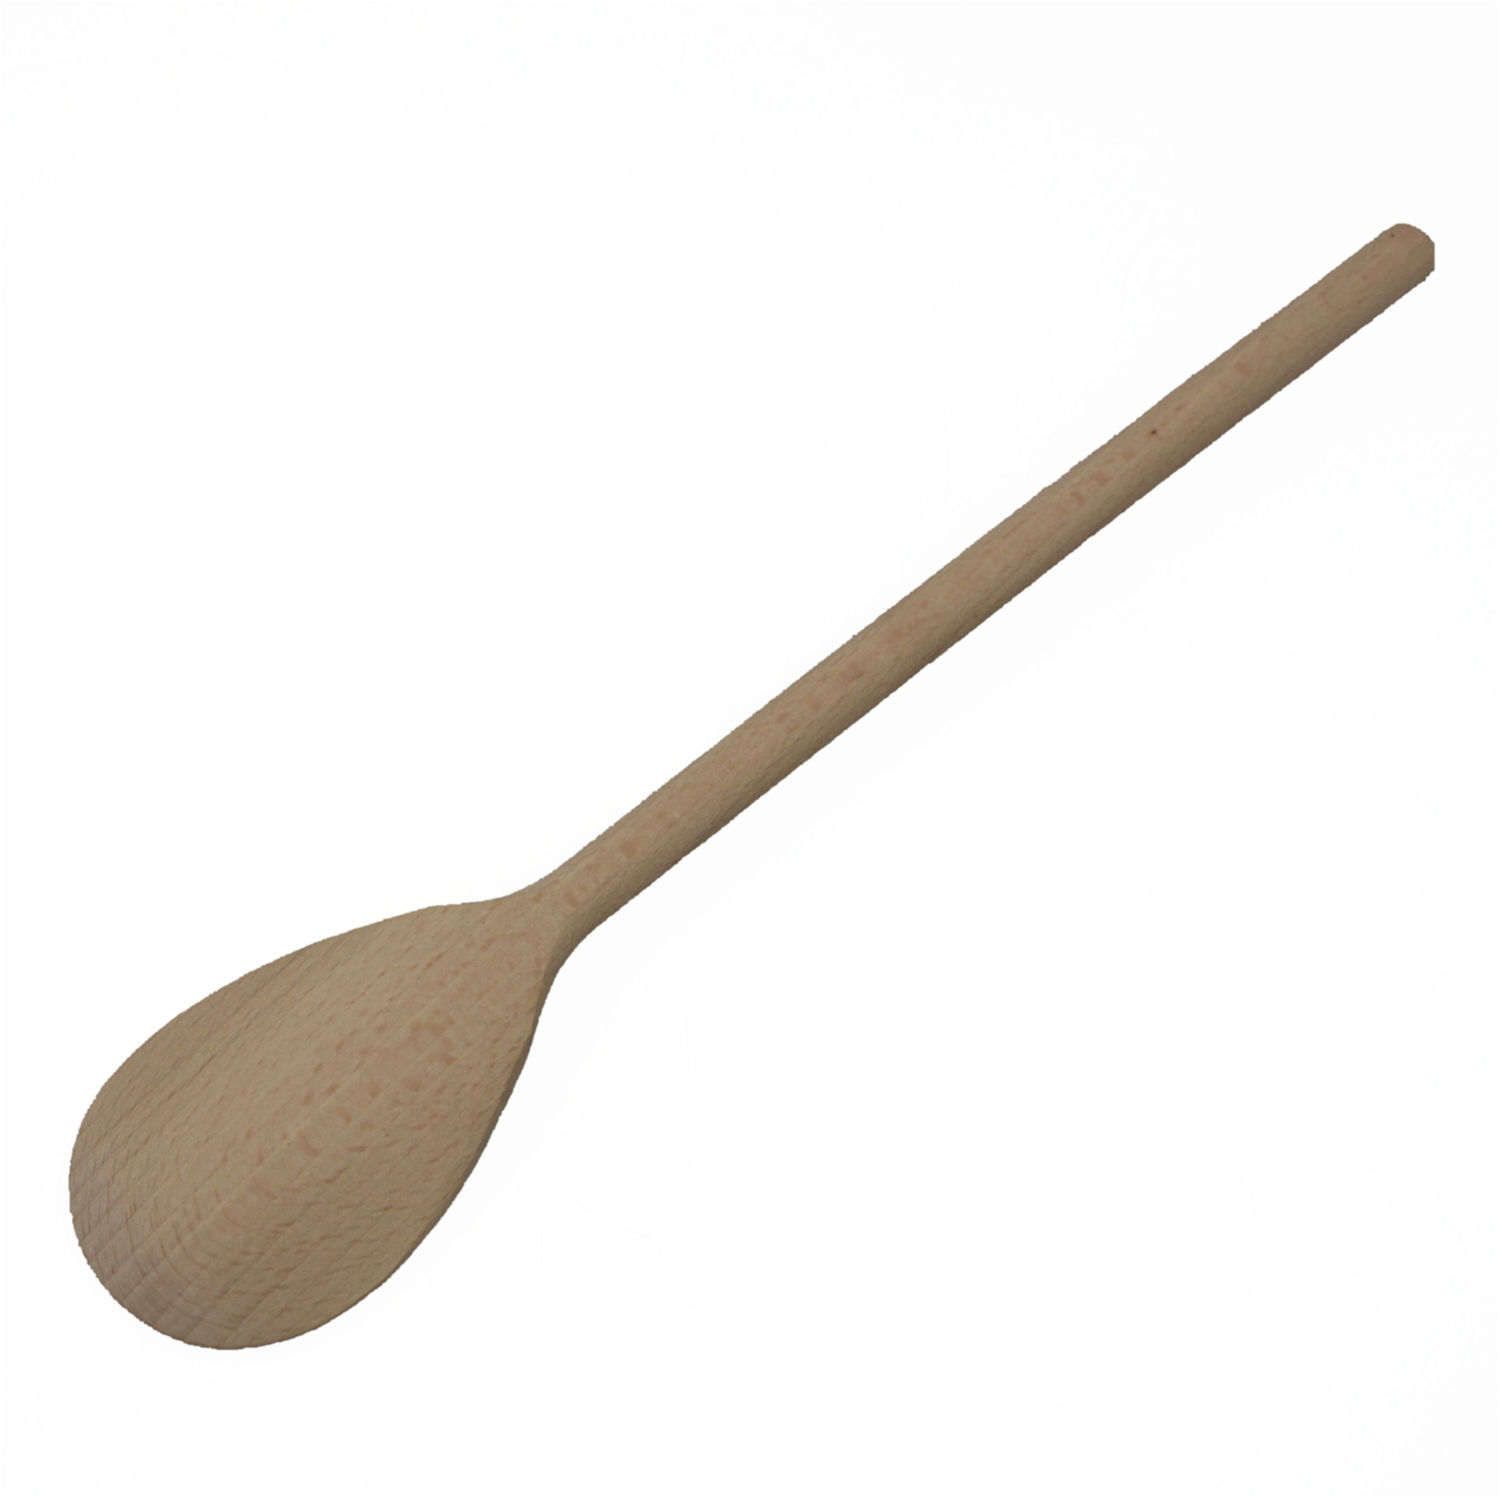 sustainable cooking spoon made from natural beech wood